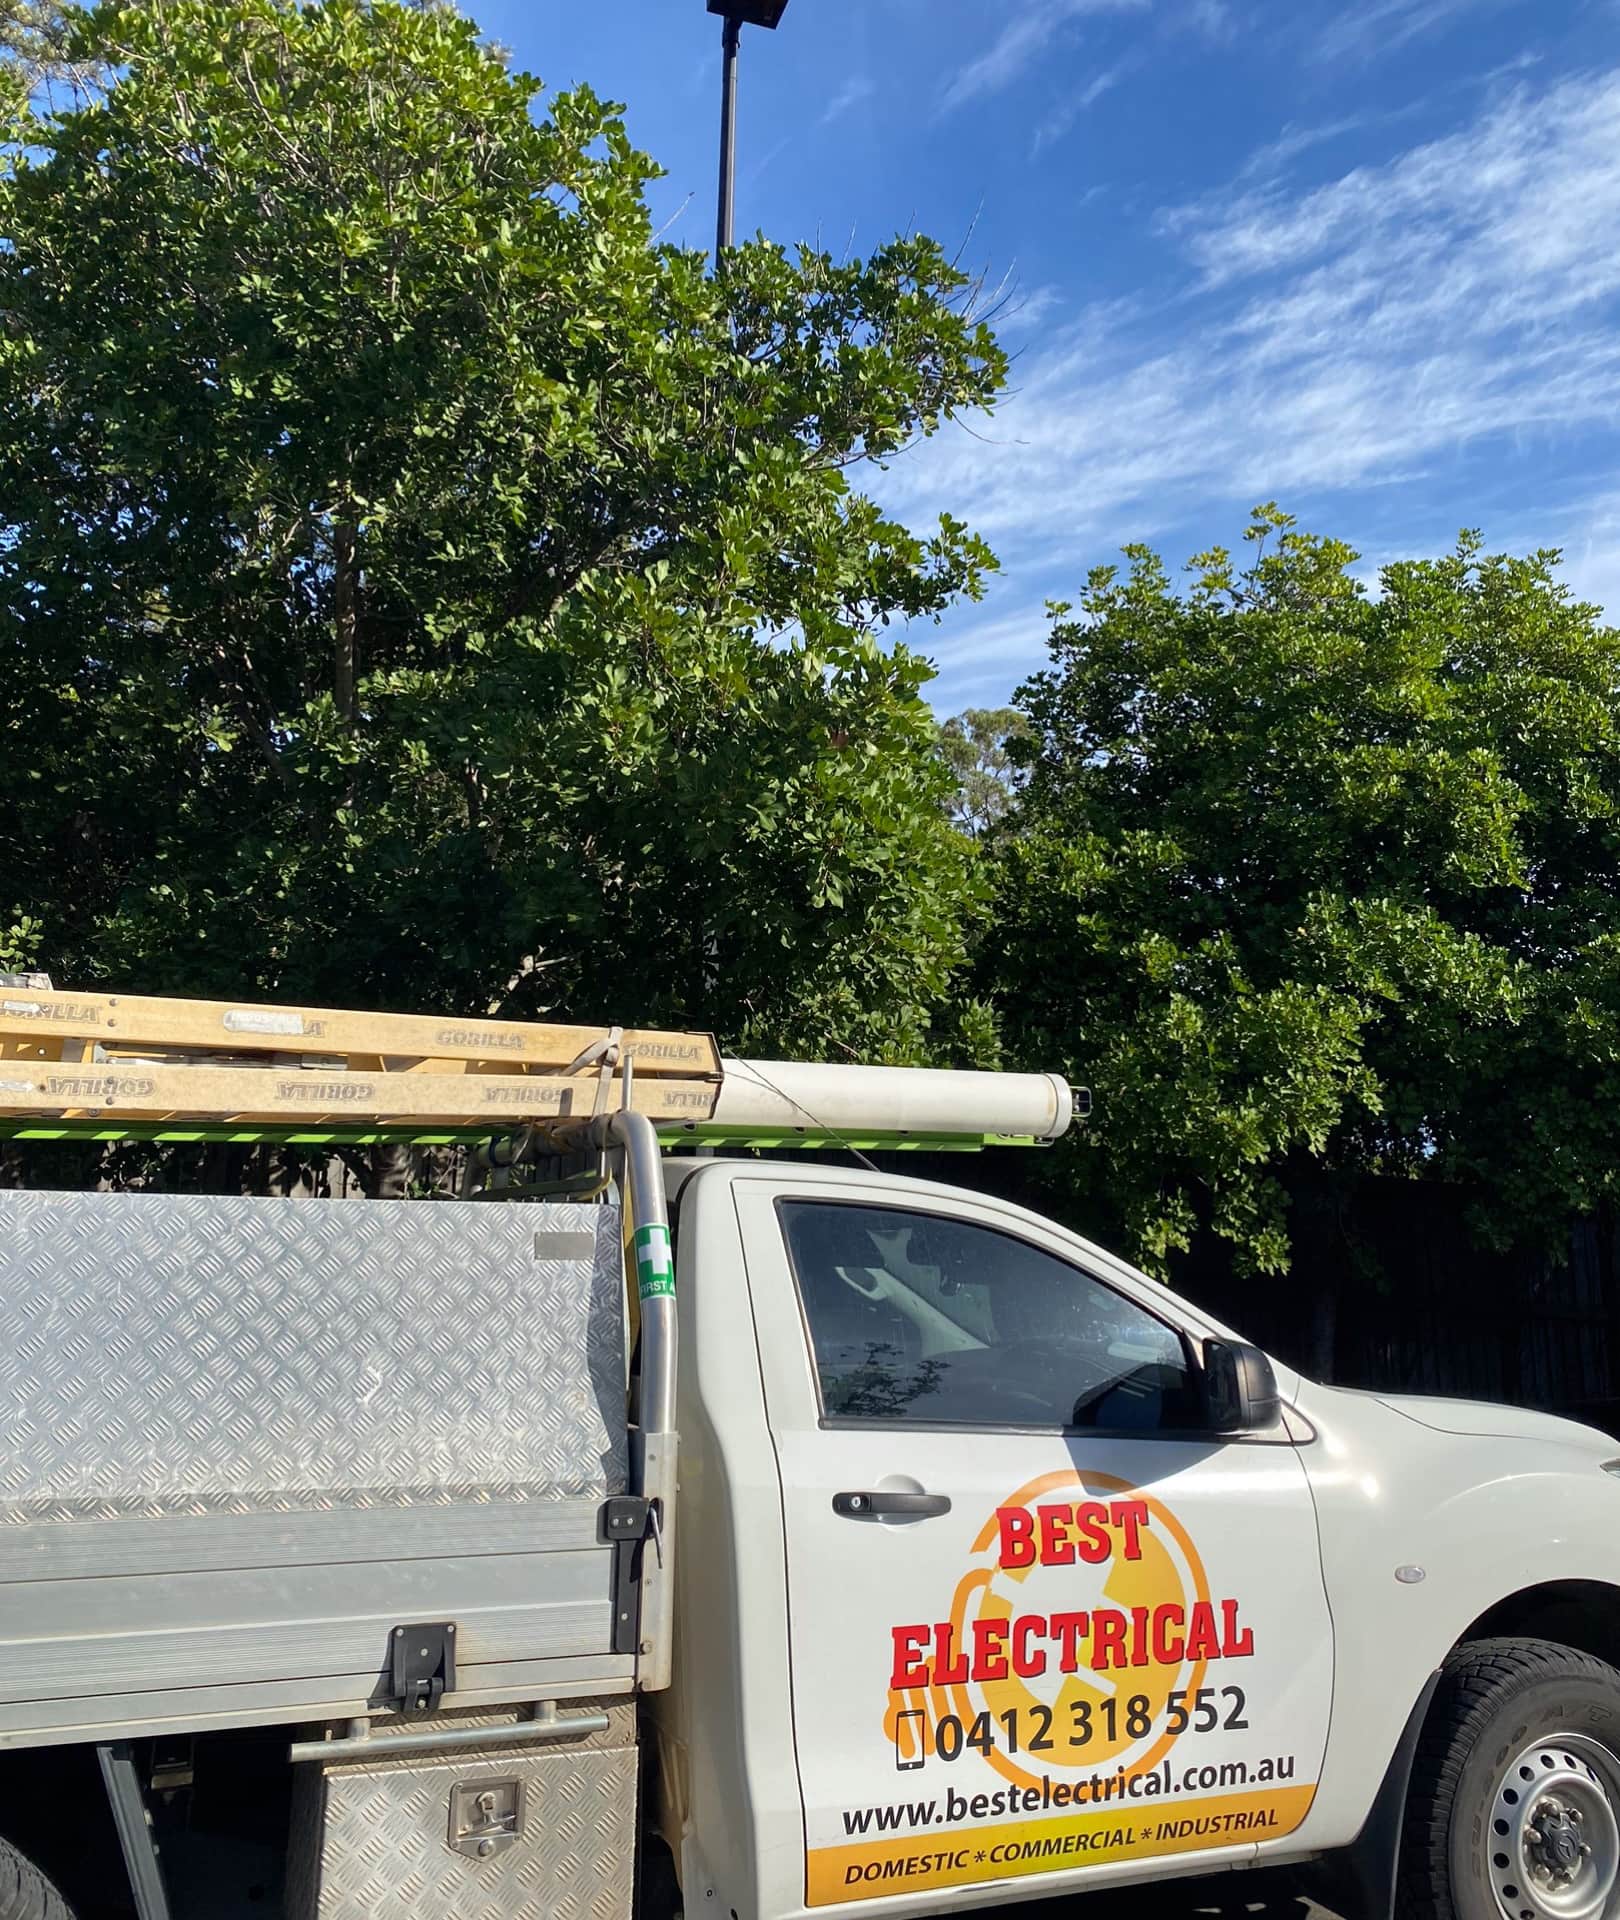 Best Electrical - Mareeba, AU, electric solutions